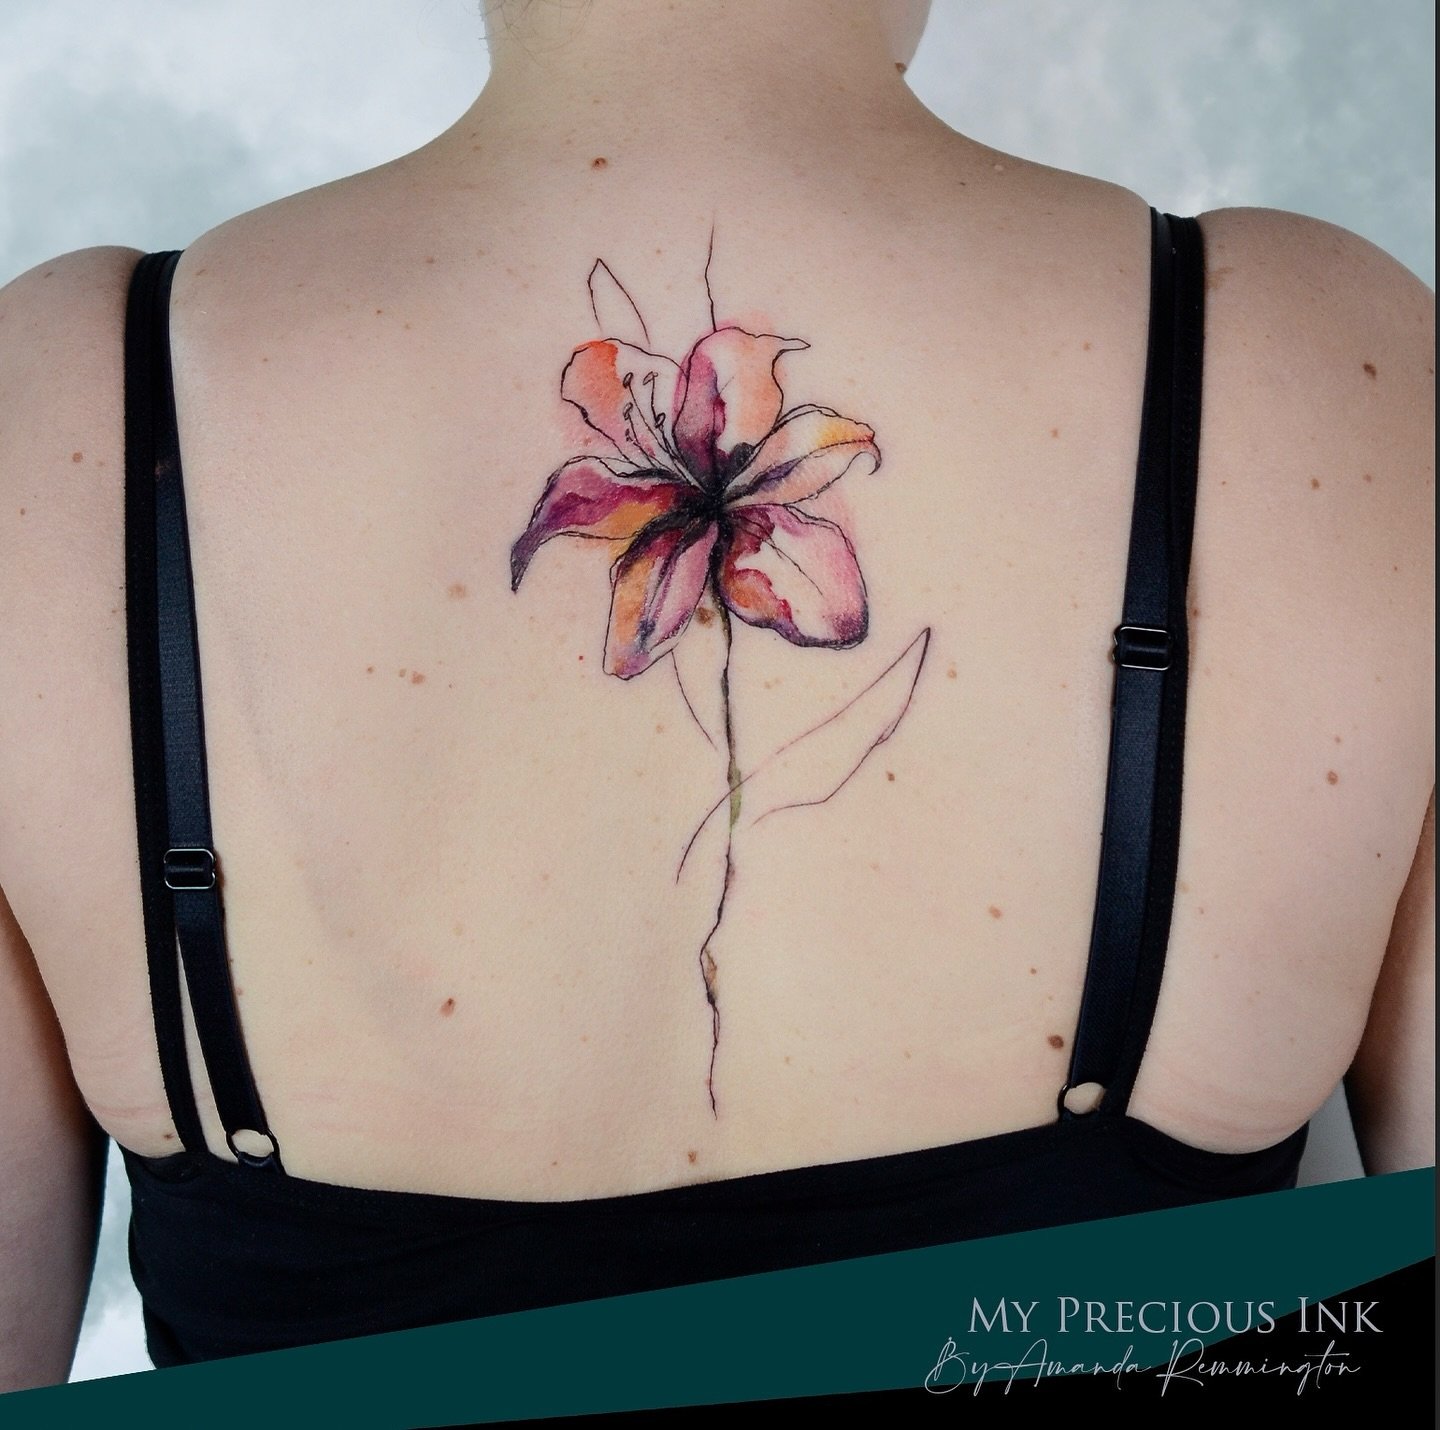 Freehand abstract Lilly tattoo 

#tattoolifecommunity #watercolortattoos  #watercolortattoostyle #watercolortattooartist #abstracttattoo #tattoostagrams #dutchtattooartist #colortattooartist  #abstracttattooart #abstracttattoos #colorfulltattoo #dipc